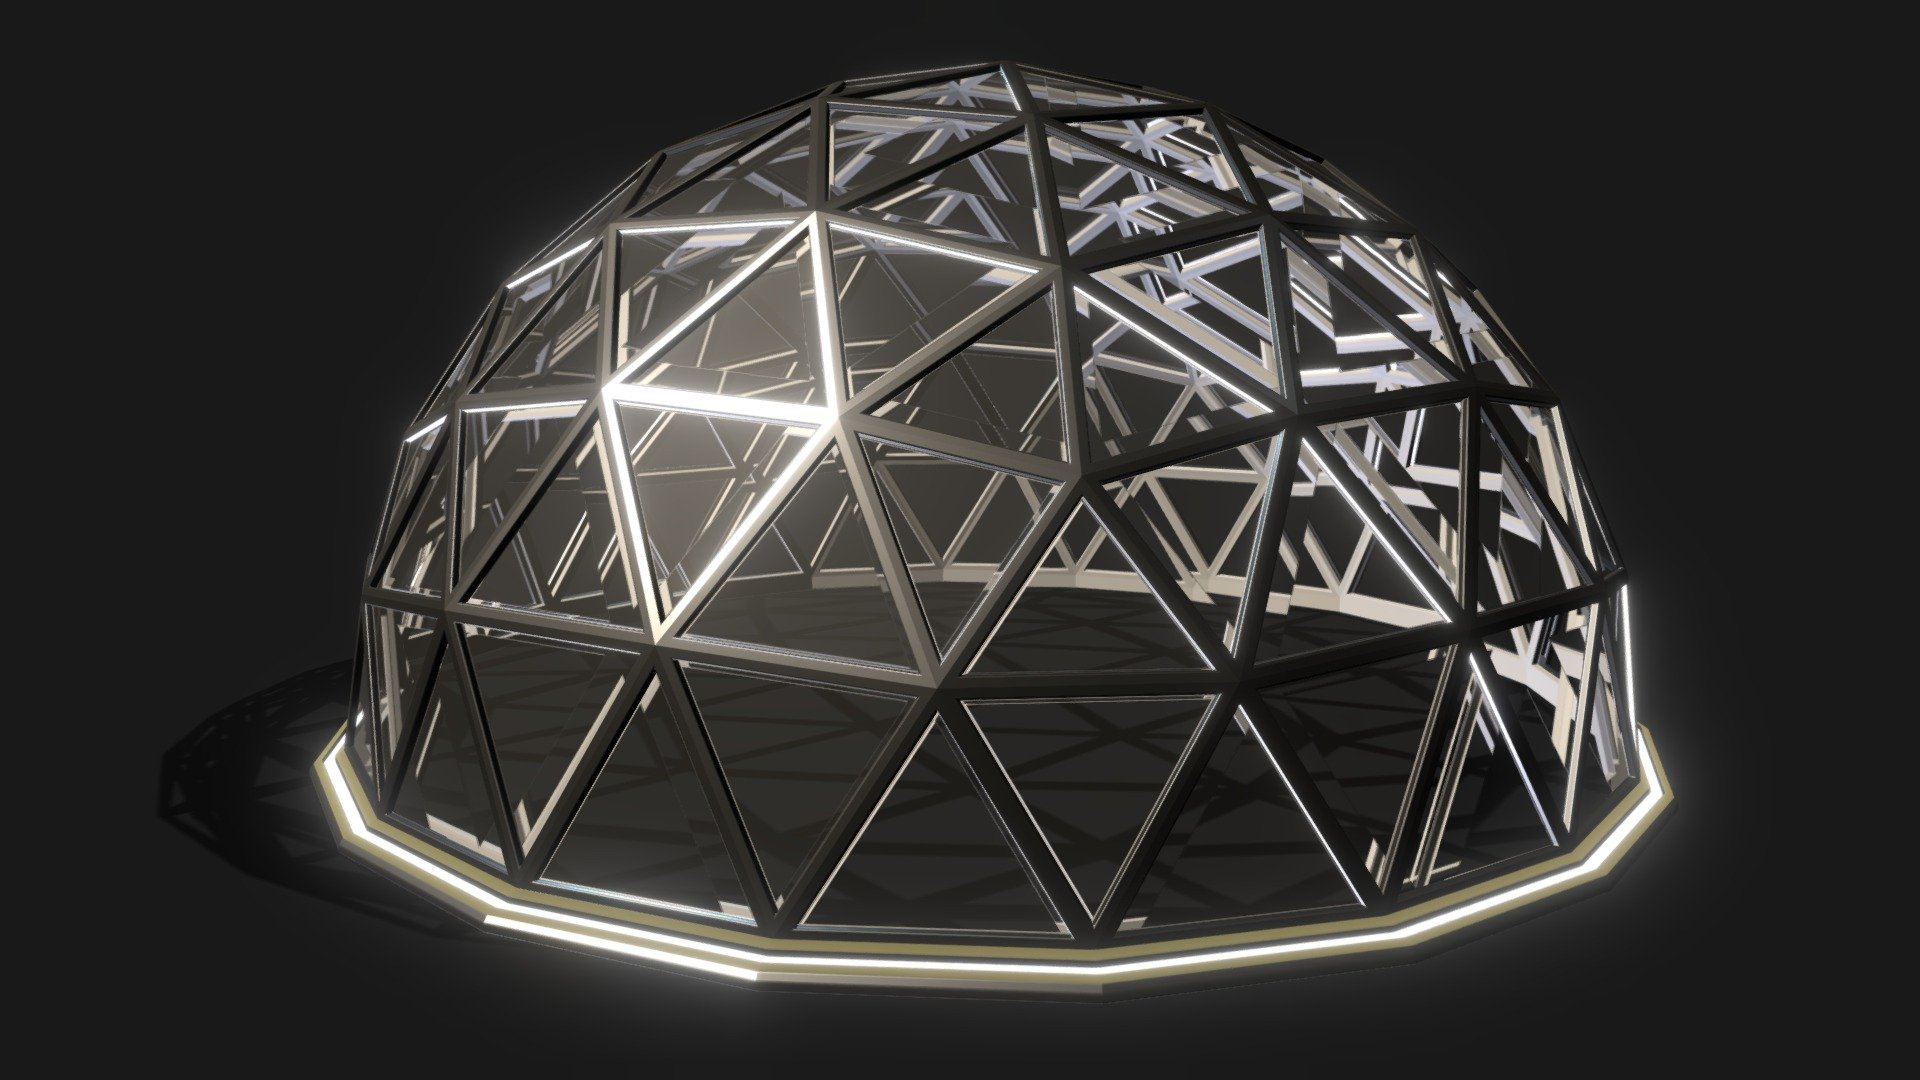 A simple glass dome object I made in Blender without textures for a 3d racing game 3d model